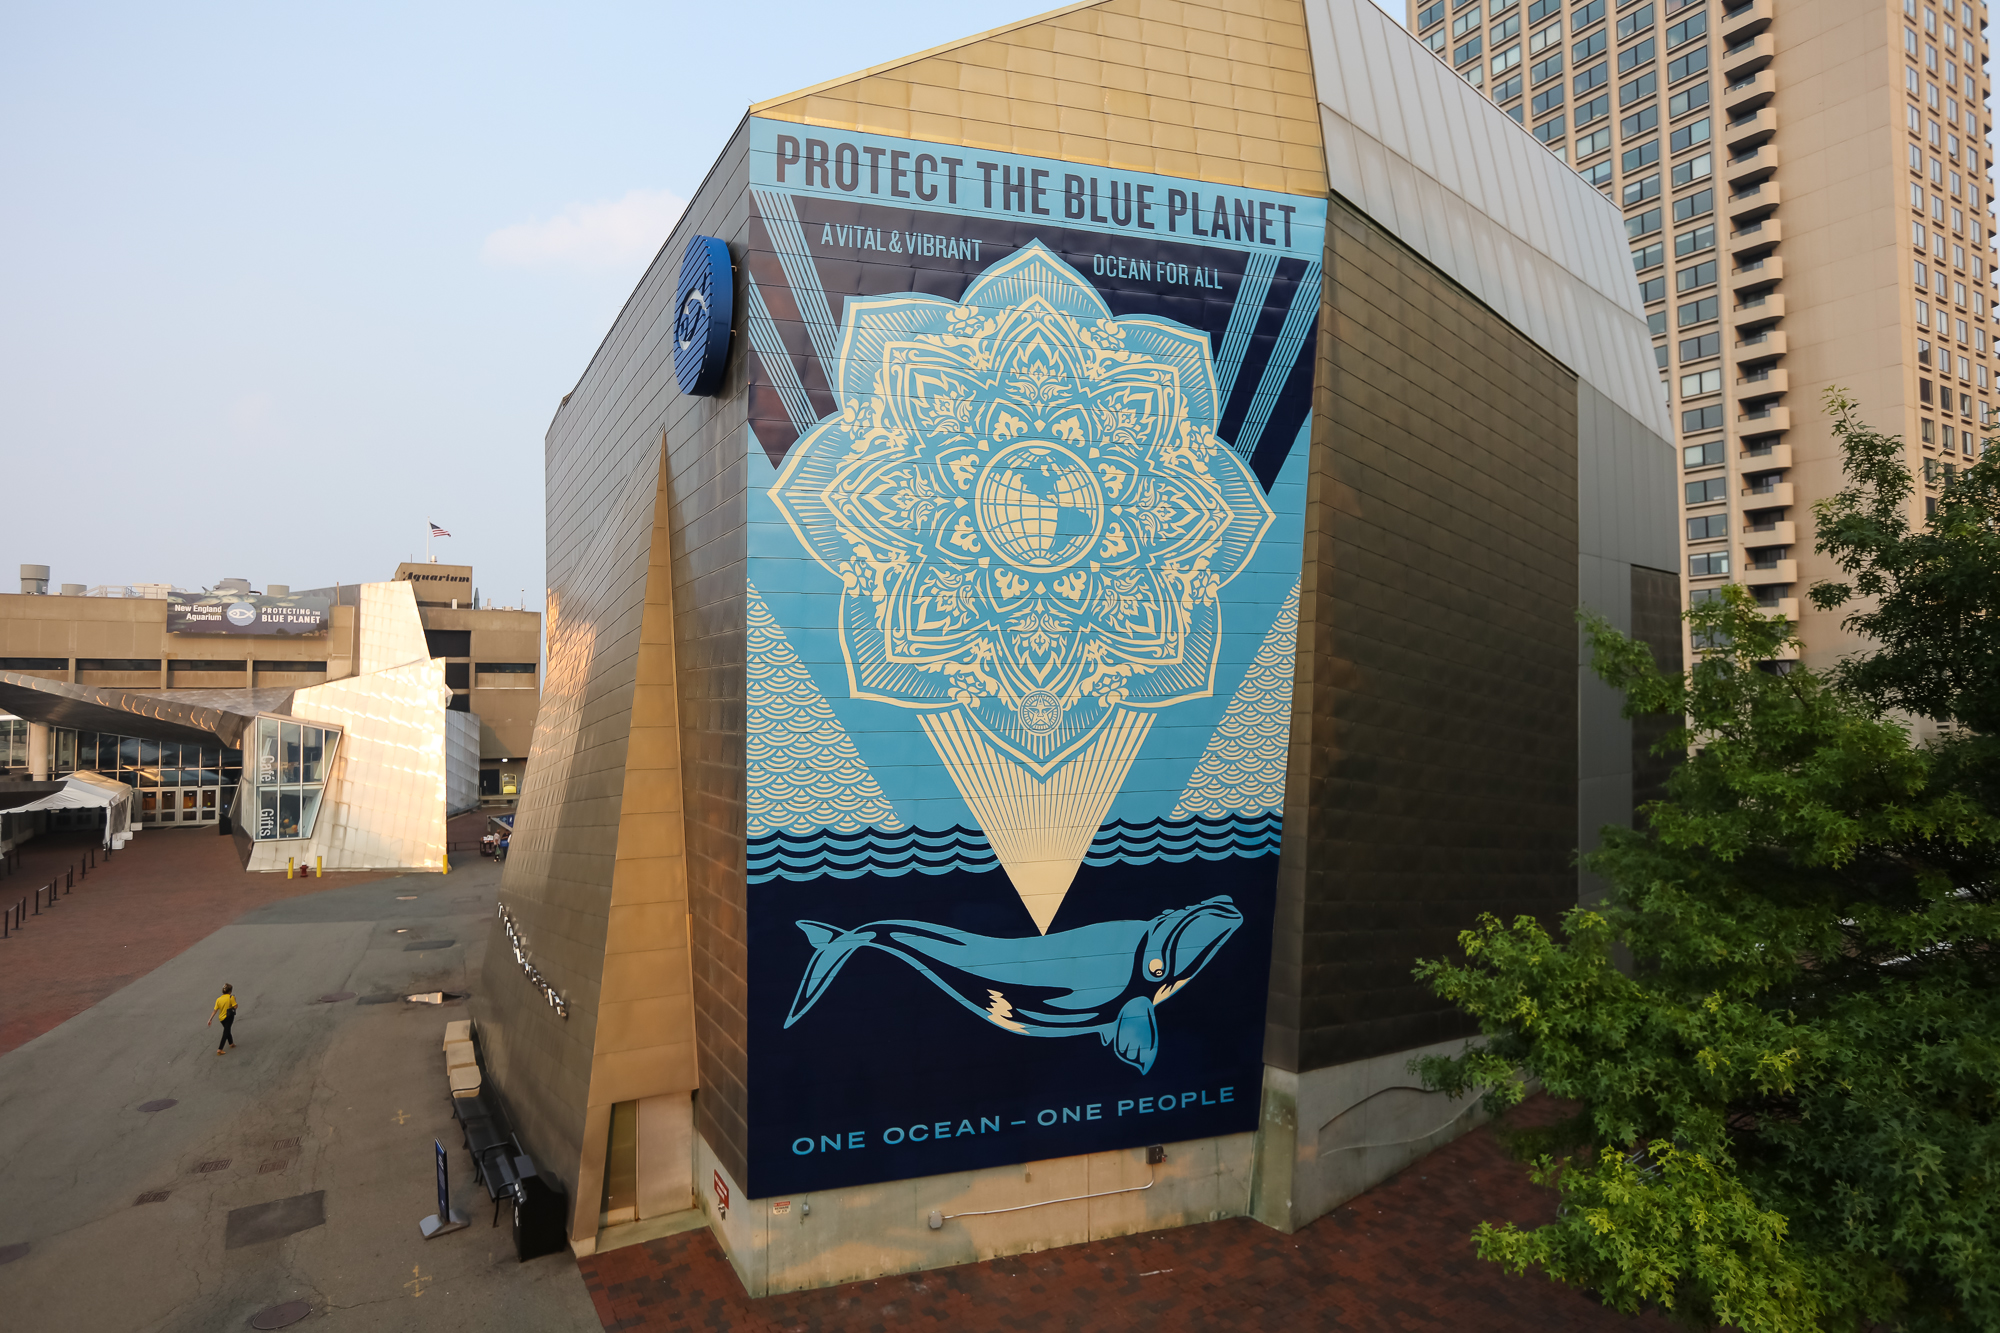 Vital and Vibrant Ocean for All mural painted by Shepard Fairey